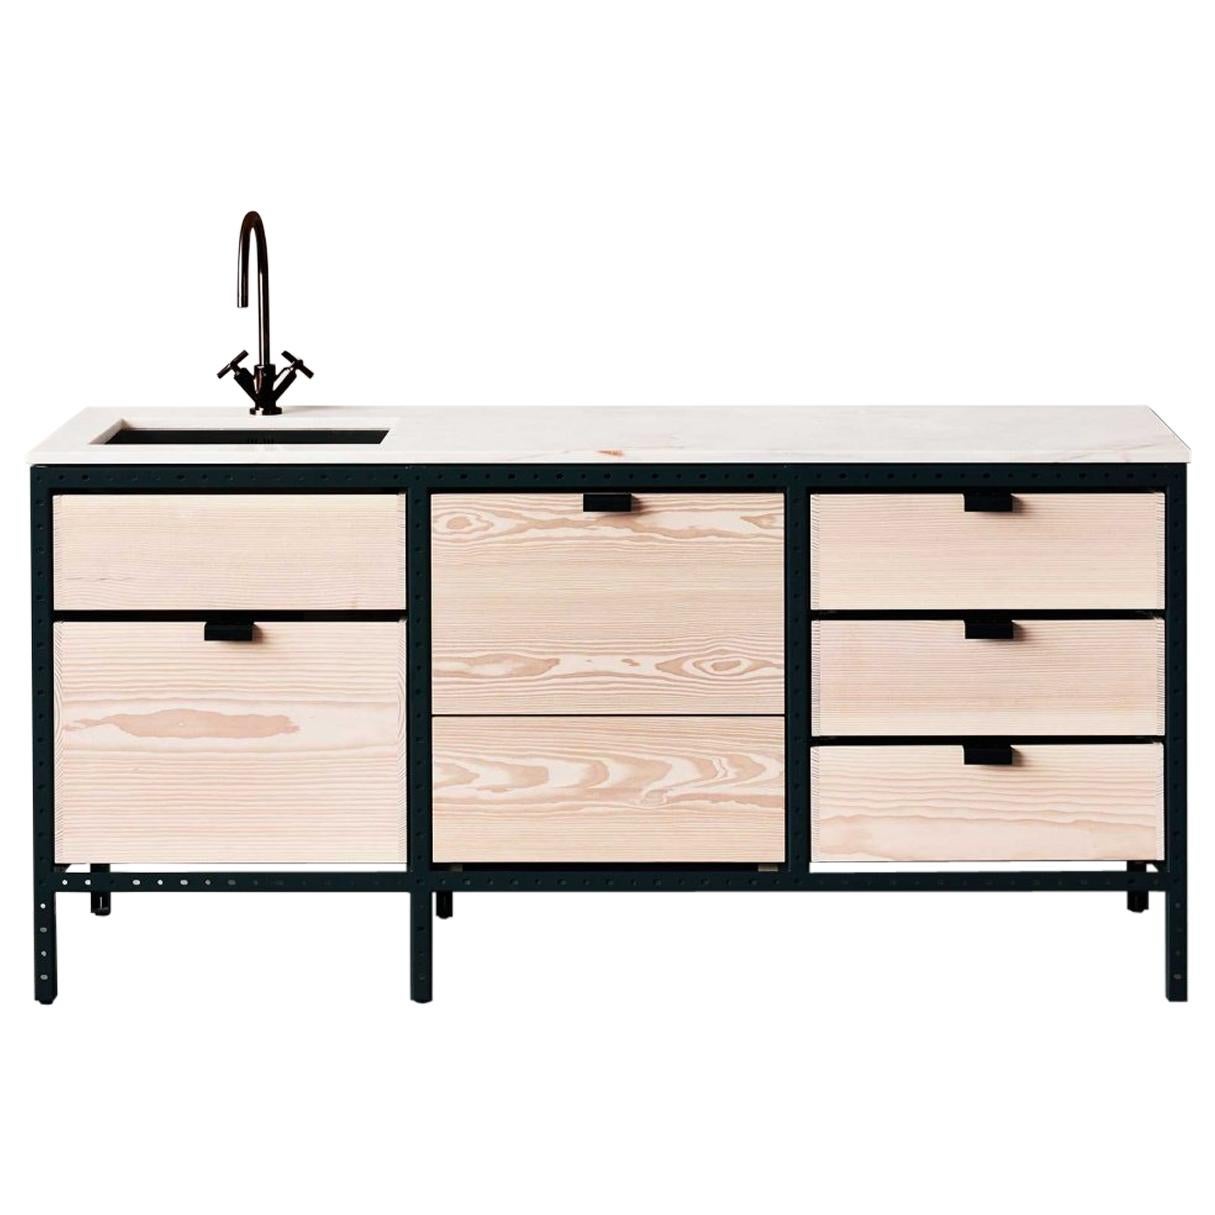 Frama Contemporary Kitchen Unit B in Solid Douglas Fir, Marble and Steel Frame